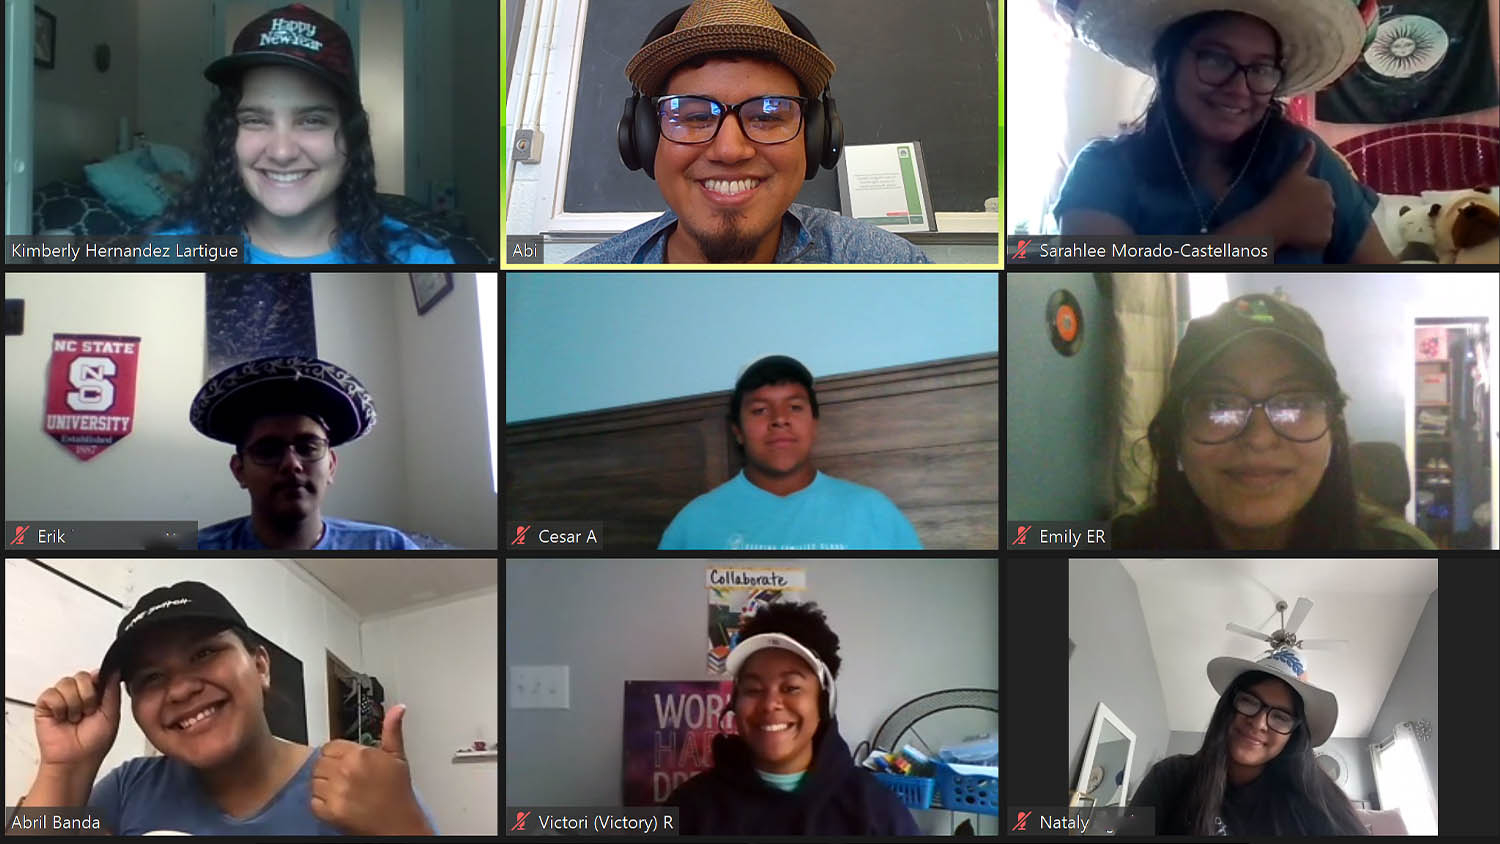 A screenshot of a Zoom call with nine participants, all wearing hats